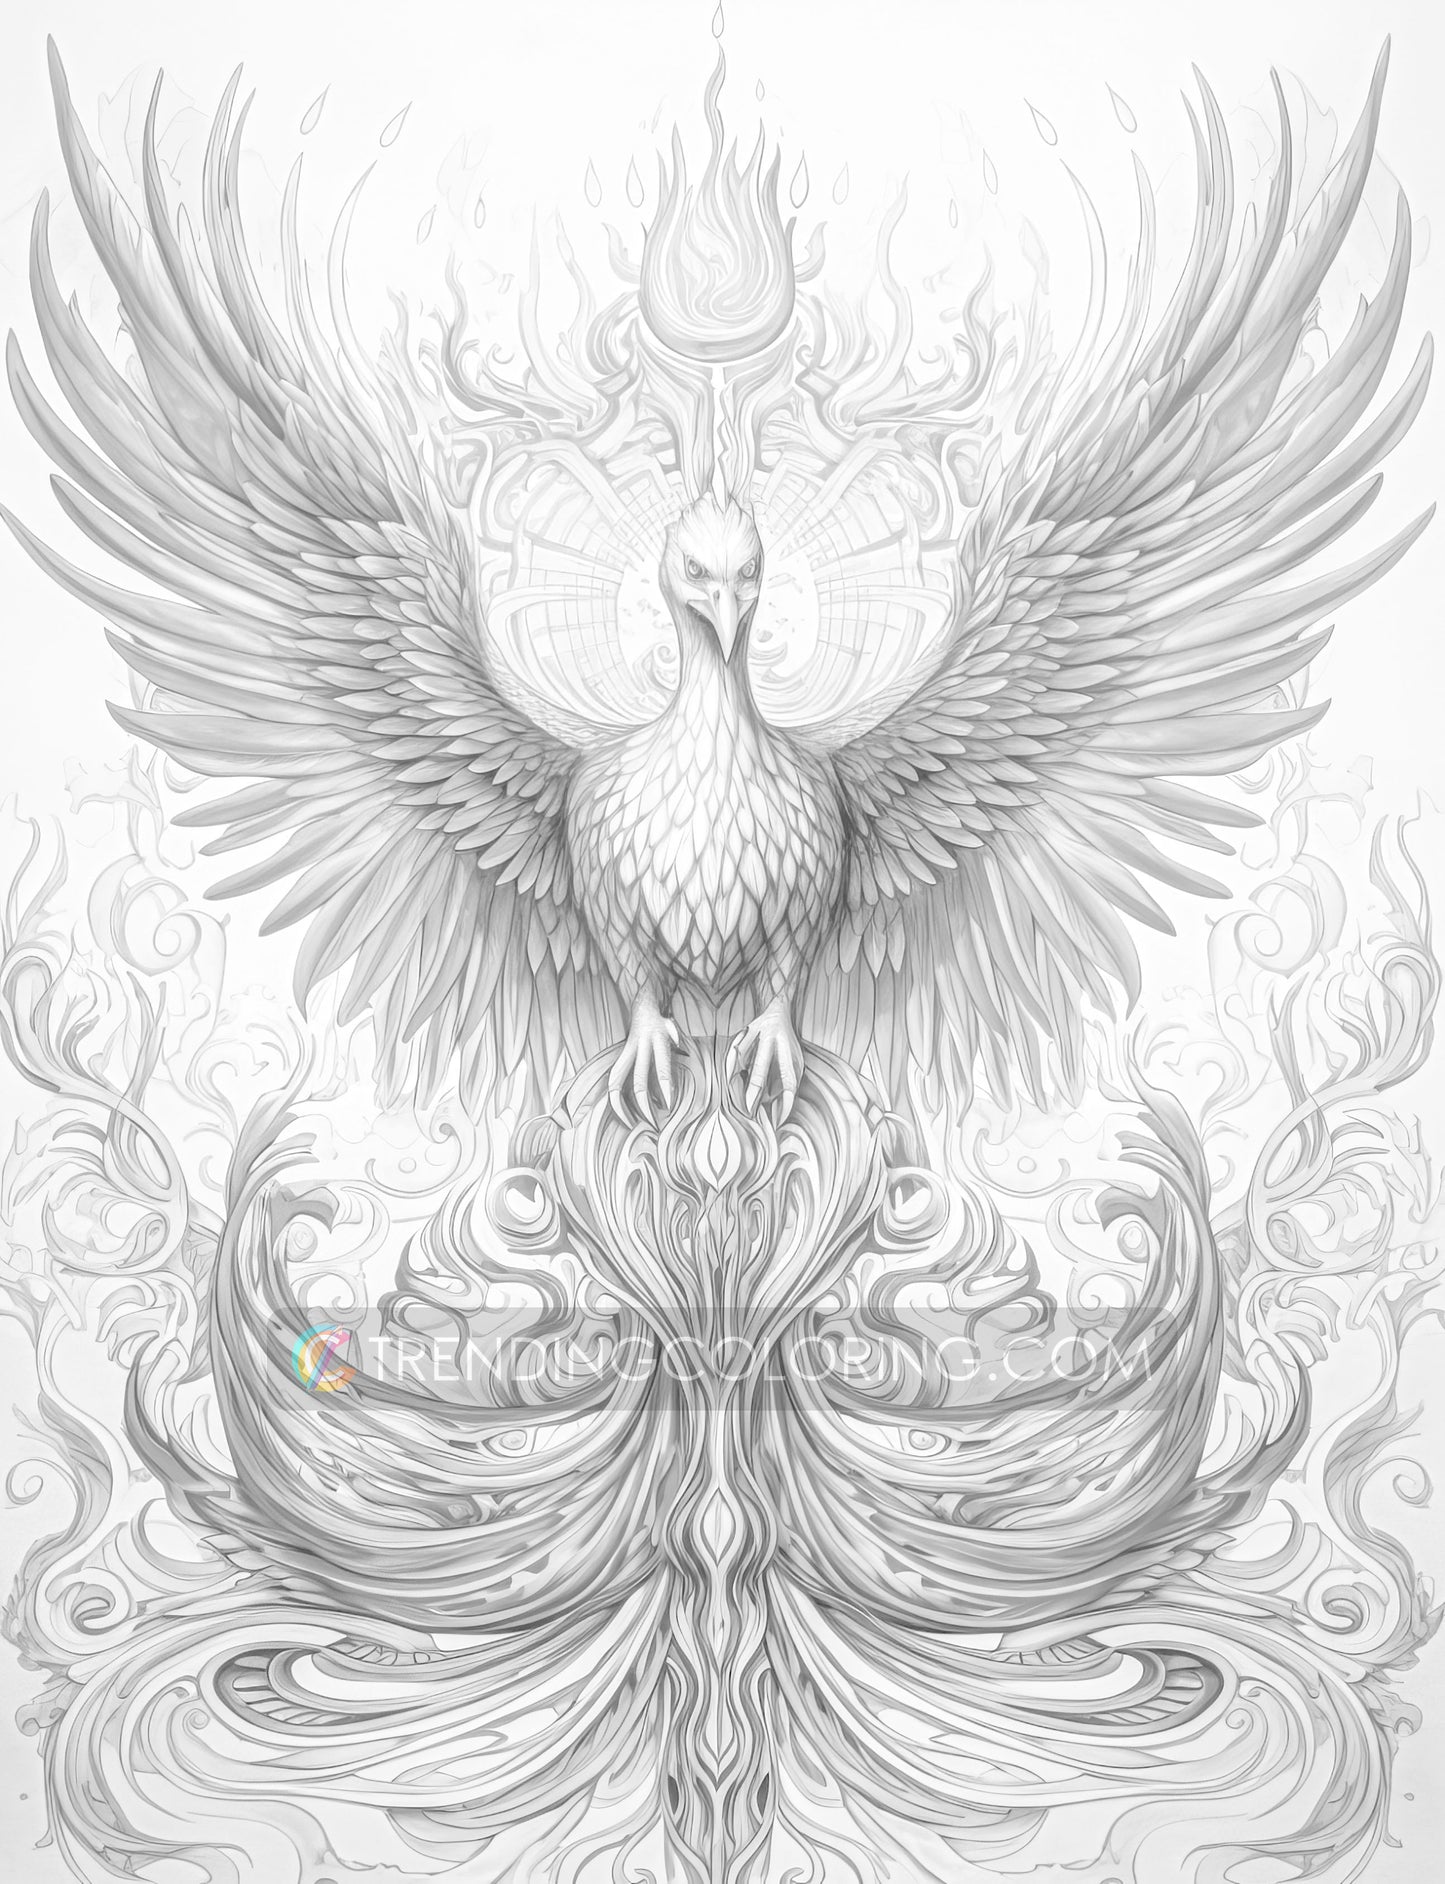 25 Mythical Phoenix Grayscale Coloring Pages - Instant Download - Printable PDF Dark/Light